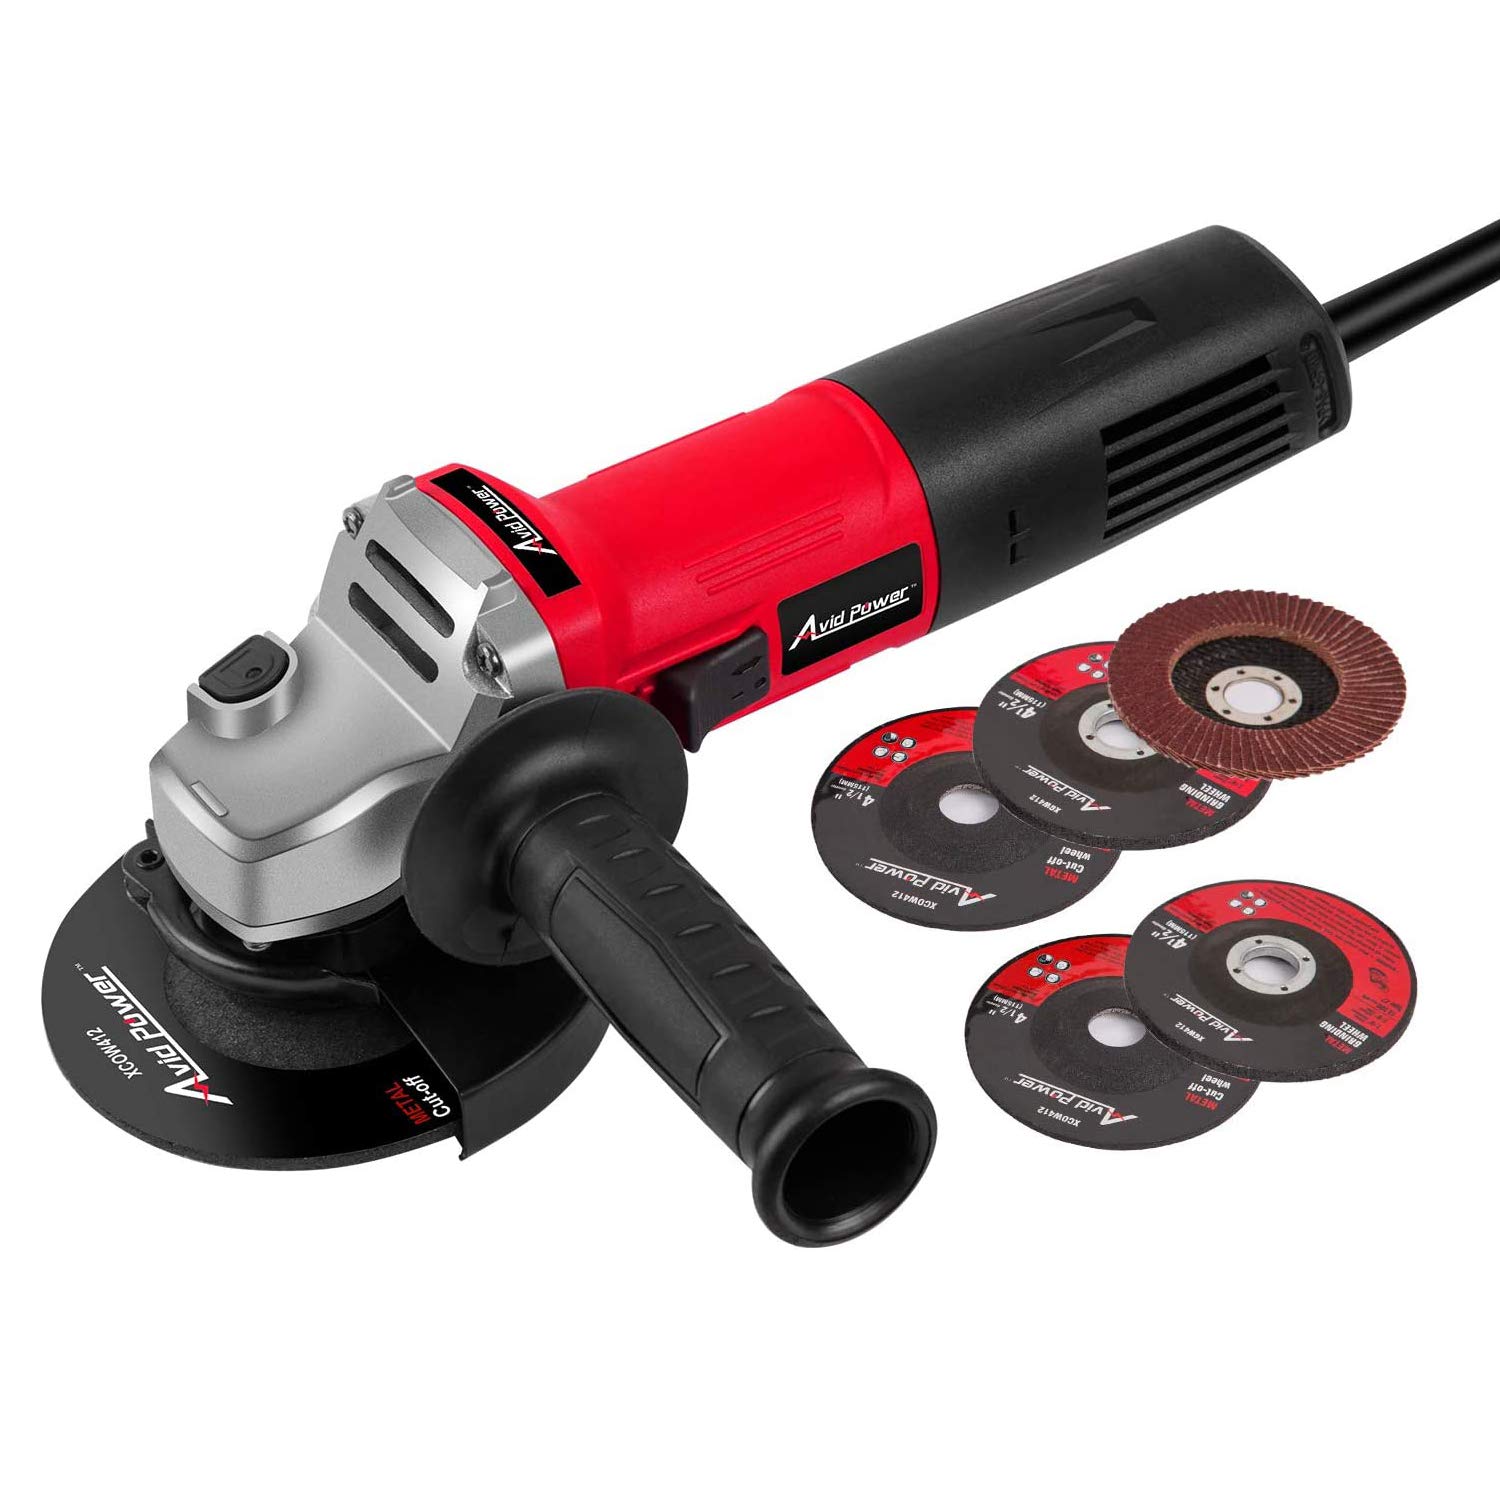 AVID POWER Angle Grinder 7.5-Amp 4-12 inch Electric Grinder Power Tools with Grinding and Cutting Wheels Flap Disc and Aux